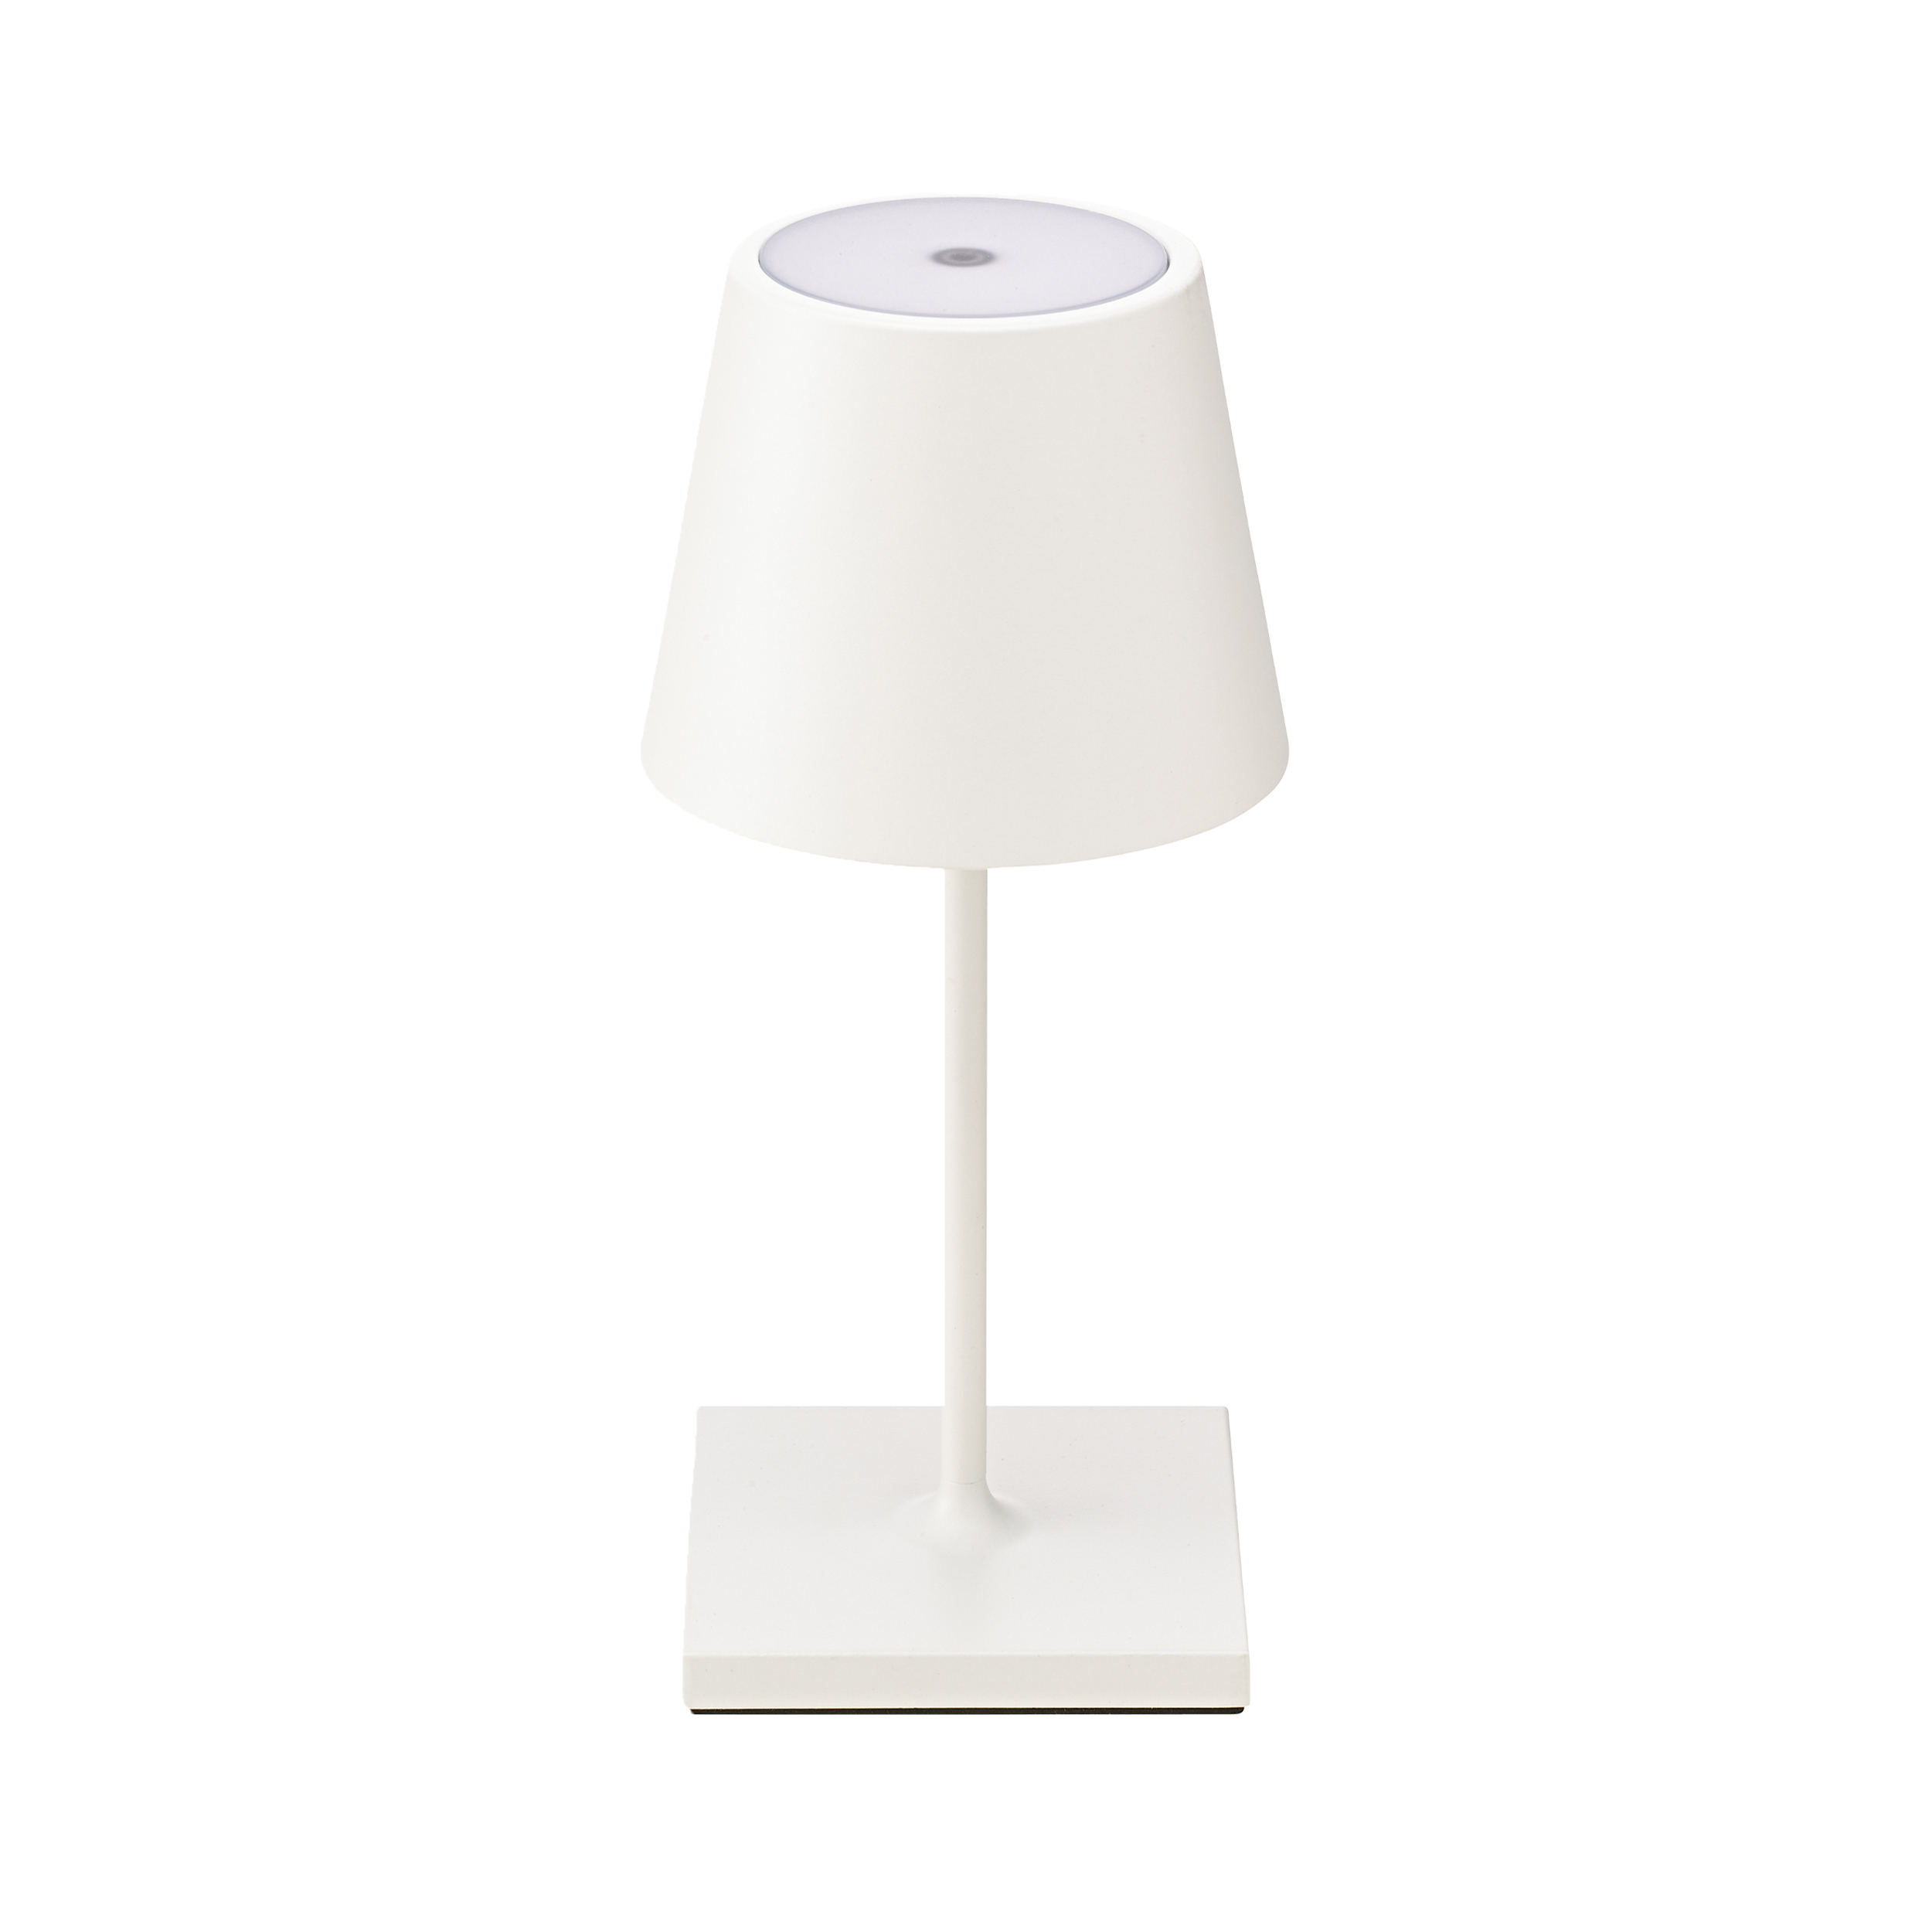 SIGOR NUINDIE Mini warmweiss Schneeweiss LED Table Lamp